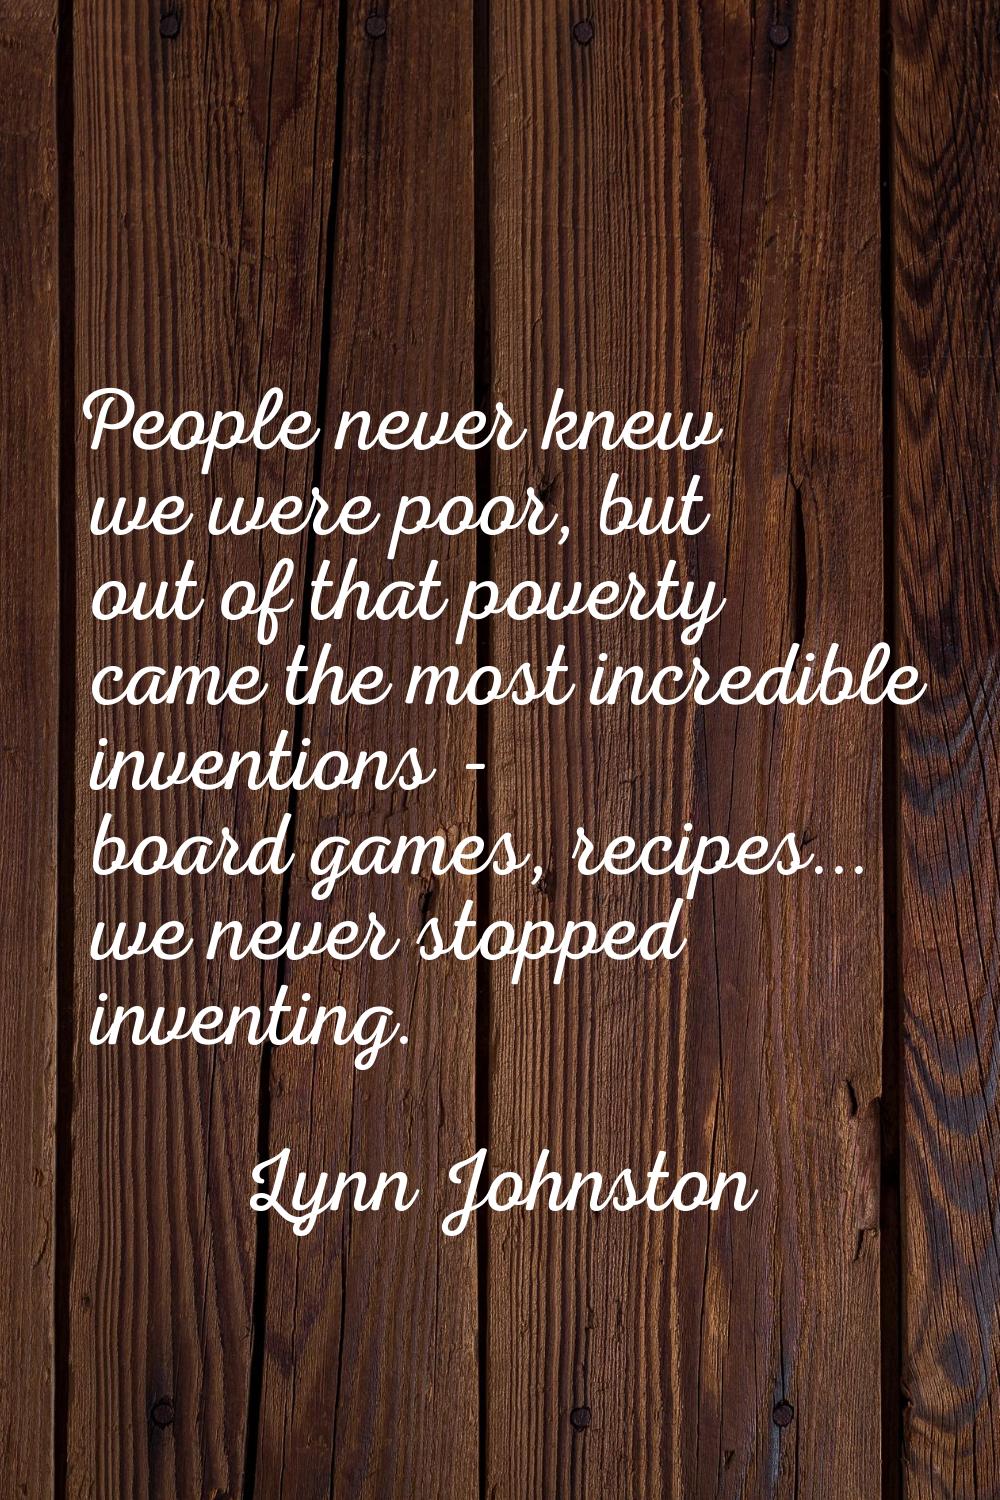 People never knew we were poor, but out of that poverty came the most incredible inventions - board